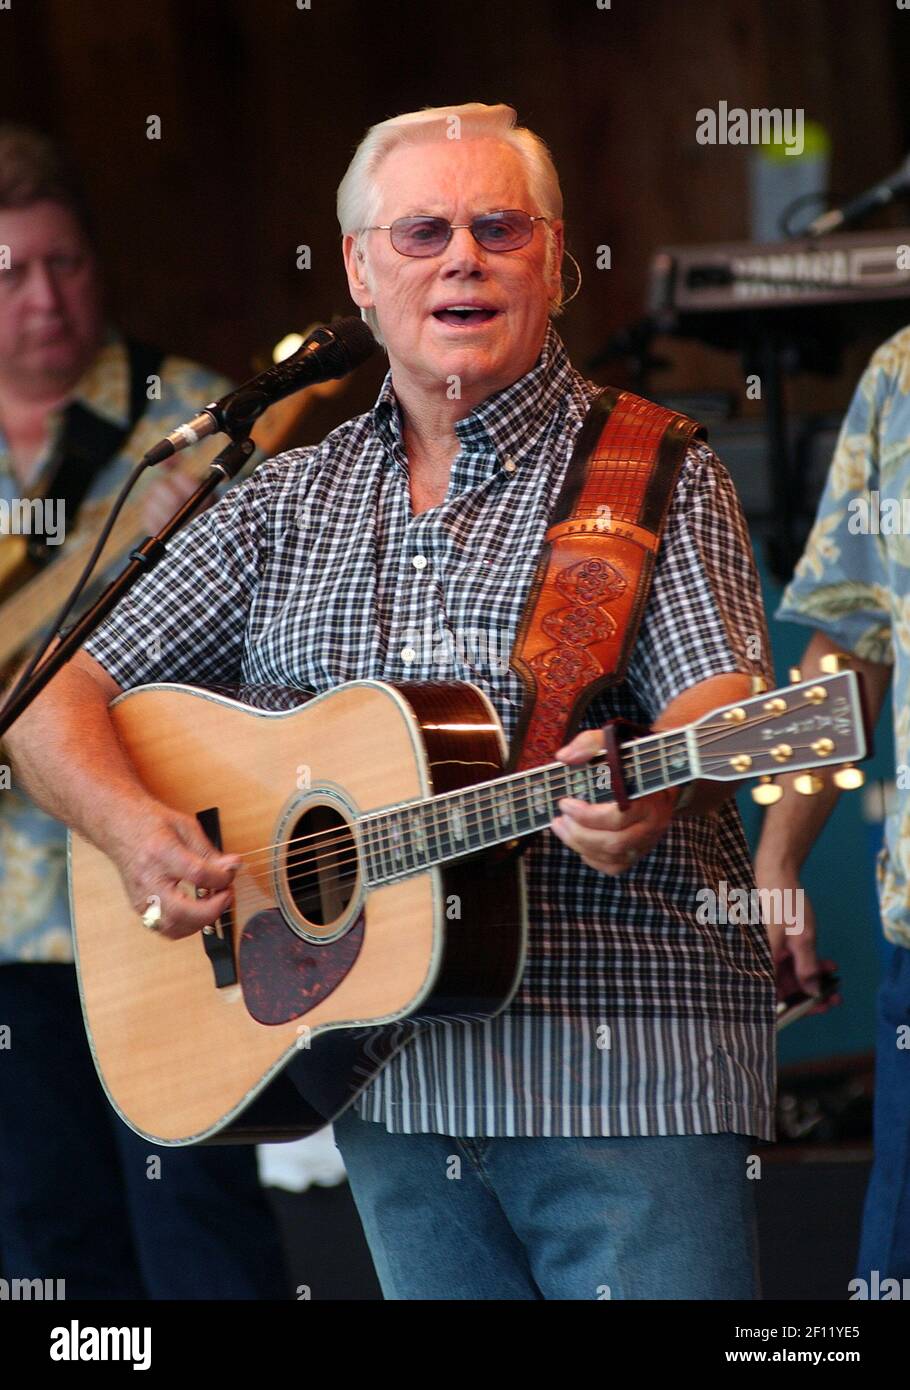 July 15, 2005; Morristown, OH, USA; Country music star GEORGE JONES performs at the 29TH ANNUAL 'JAMBOREE IN THE HILLS 2005'. Mandatory Credit: Photo by Jason Nelson/AdMedia (Â©) Copyright 2005 by Jason Nelson /Sipa USA Stock Photo